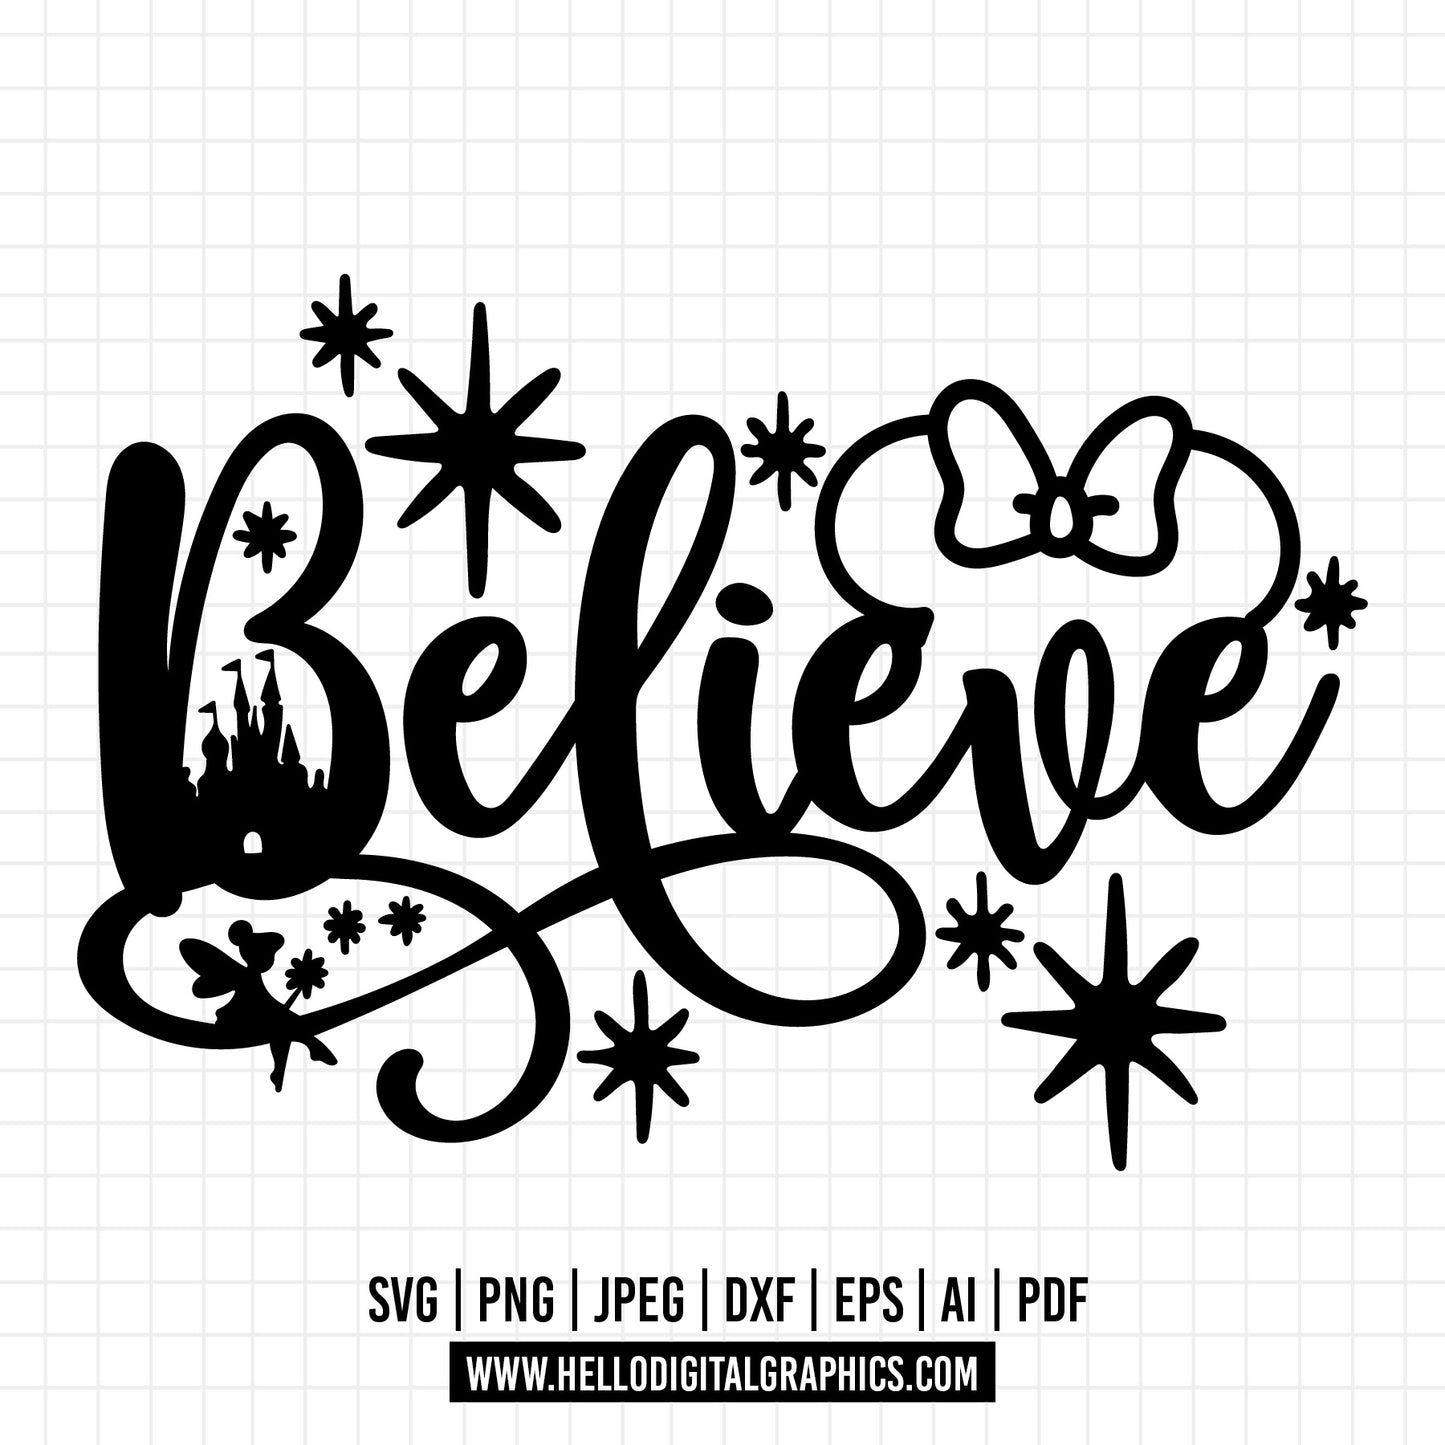 COD1191 Believe svg, Magical Svg, Mickey Svg, Castle svg, Disney svg, Magical svg, Disney quote